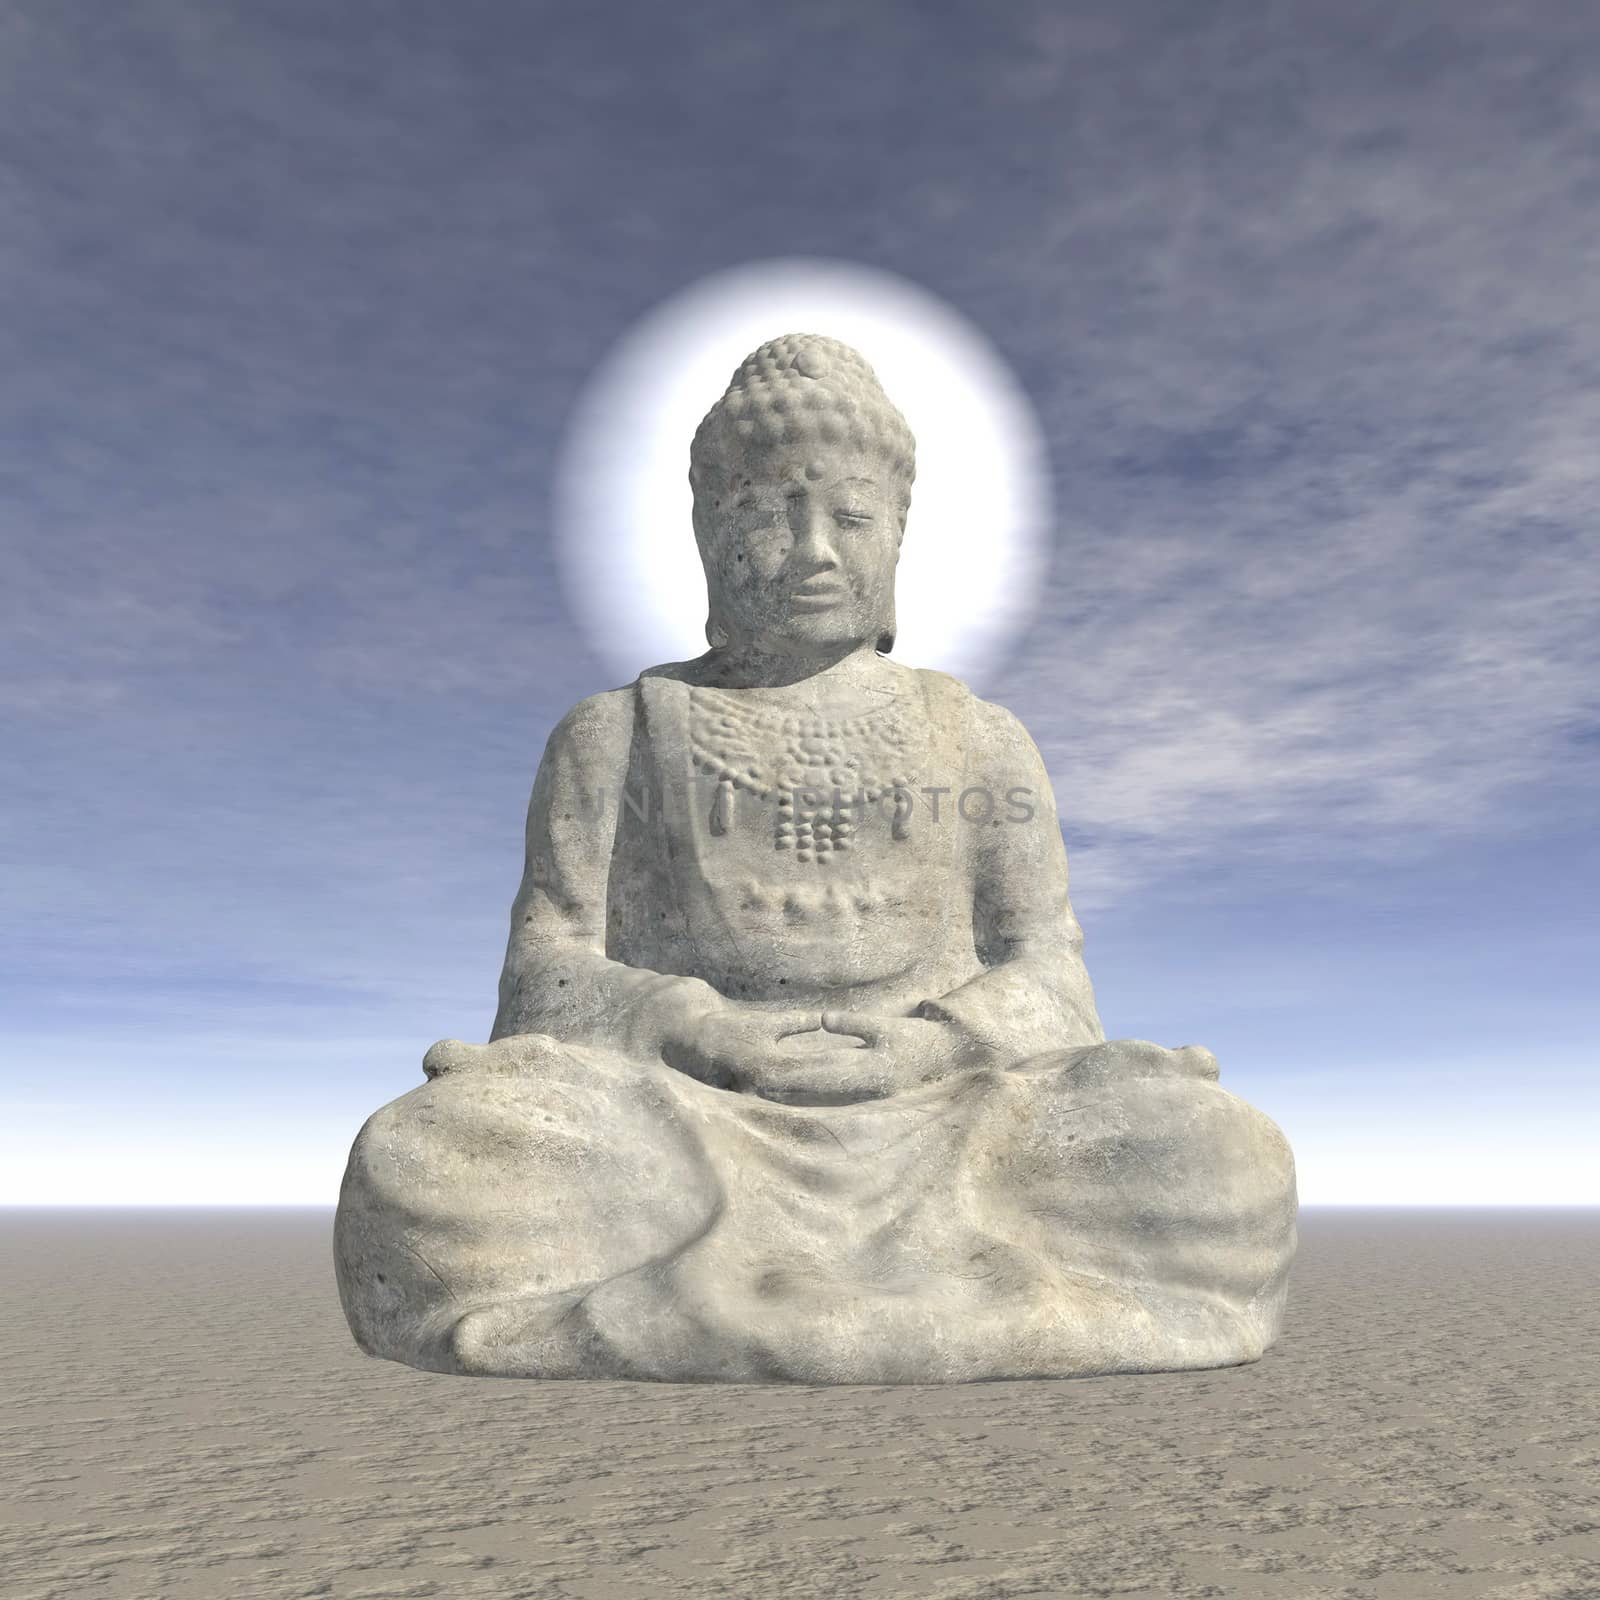 Stone statue of buddha meditating with halo around the head by day